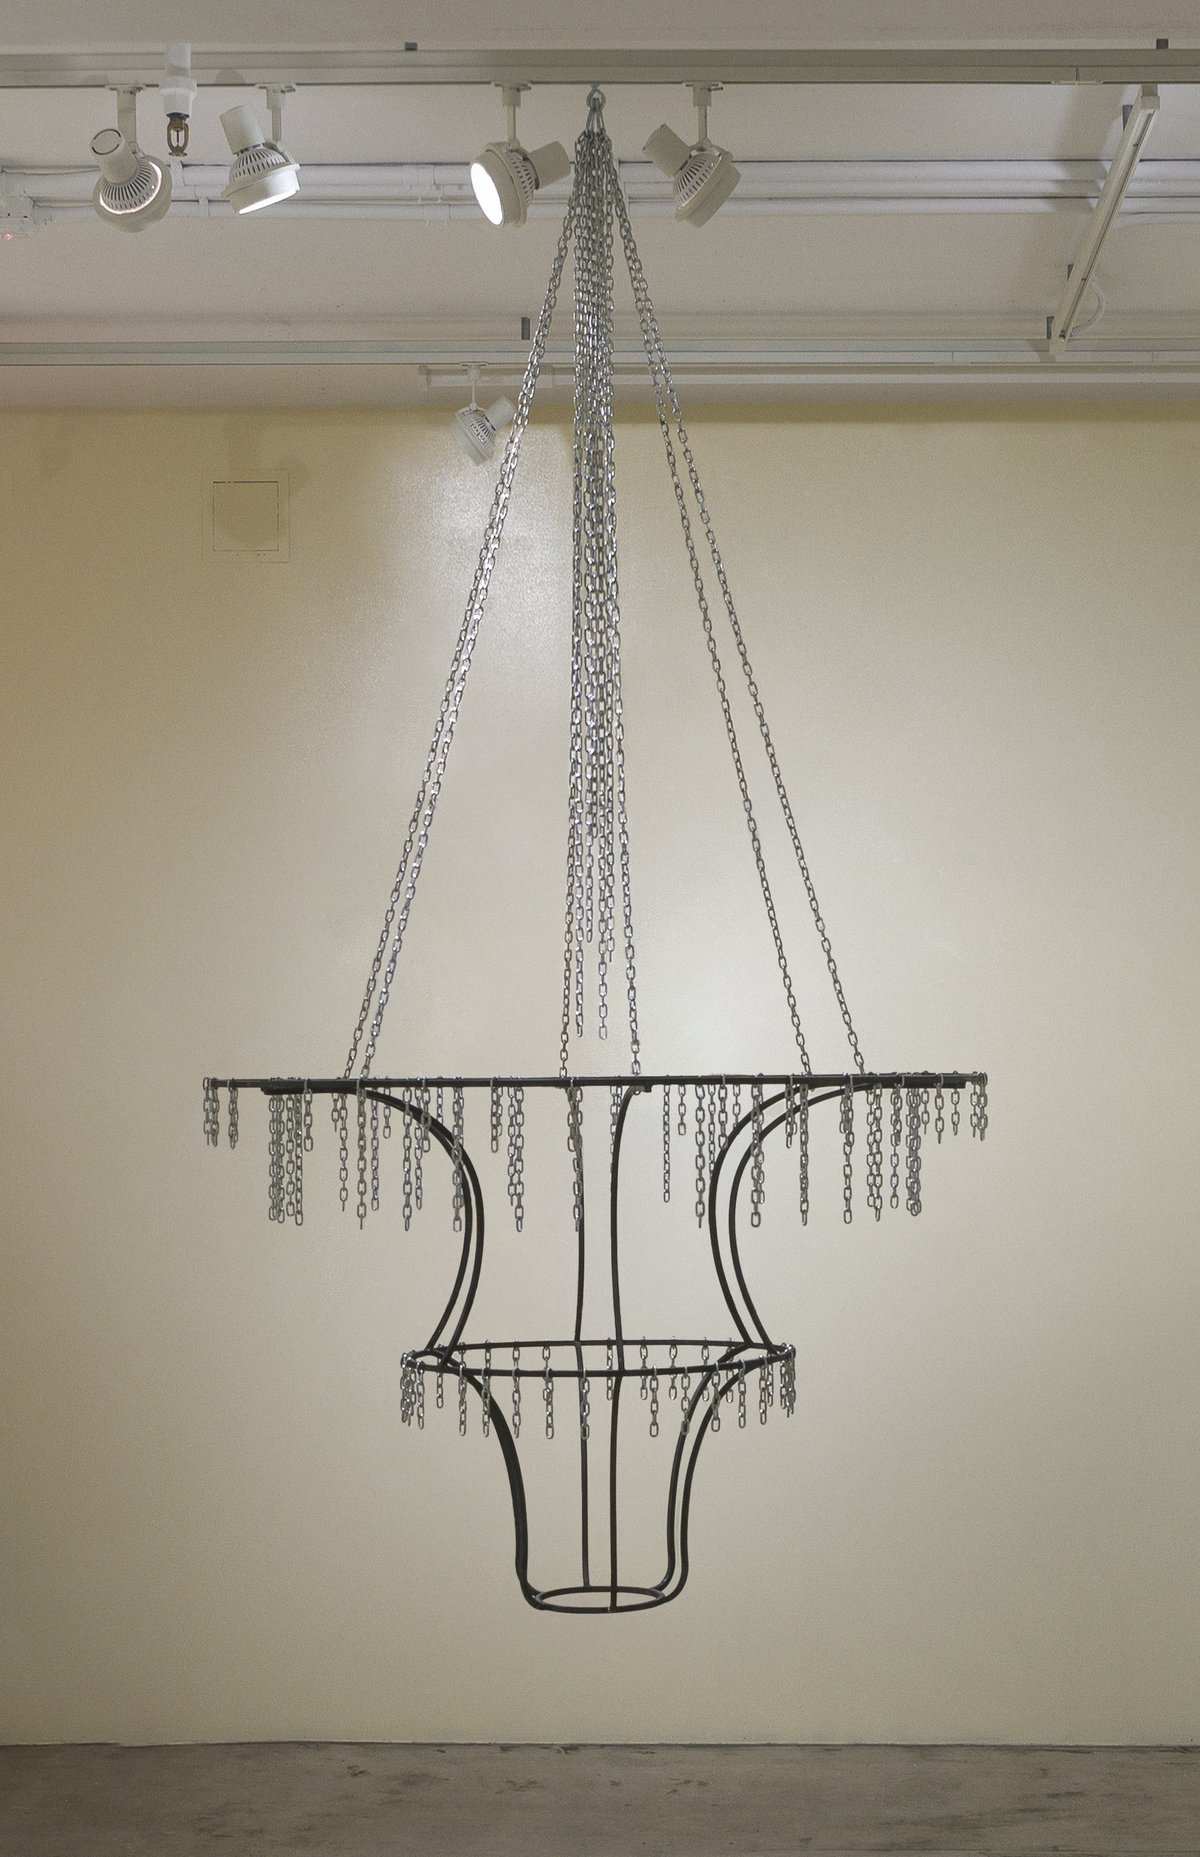 Benjamin HirteGhost, 2019Steel, bluing stain, chrome plated chains⌀ 125 x 250 cmLife and Limbs, Swiss Institute, New York, 2019